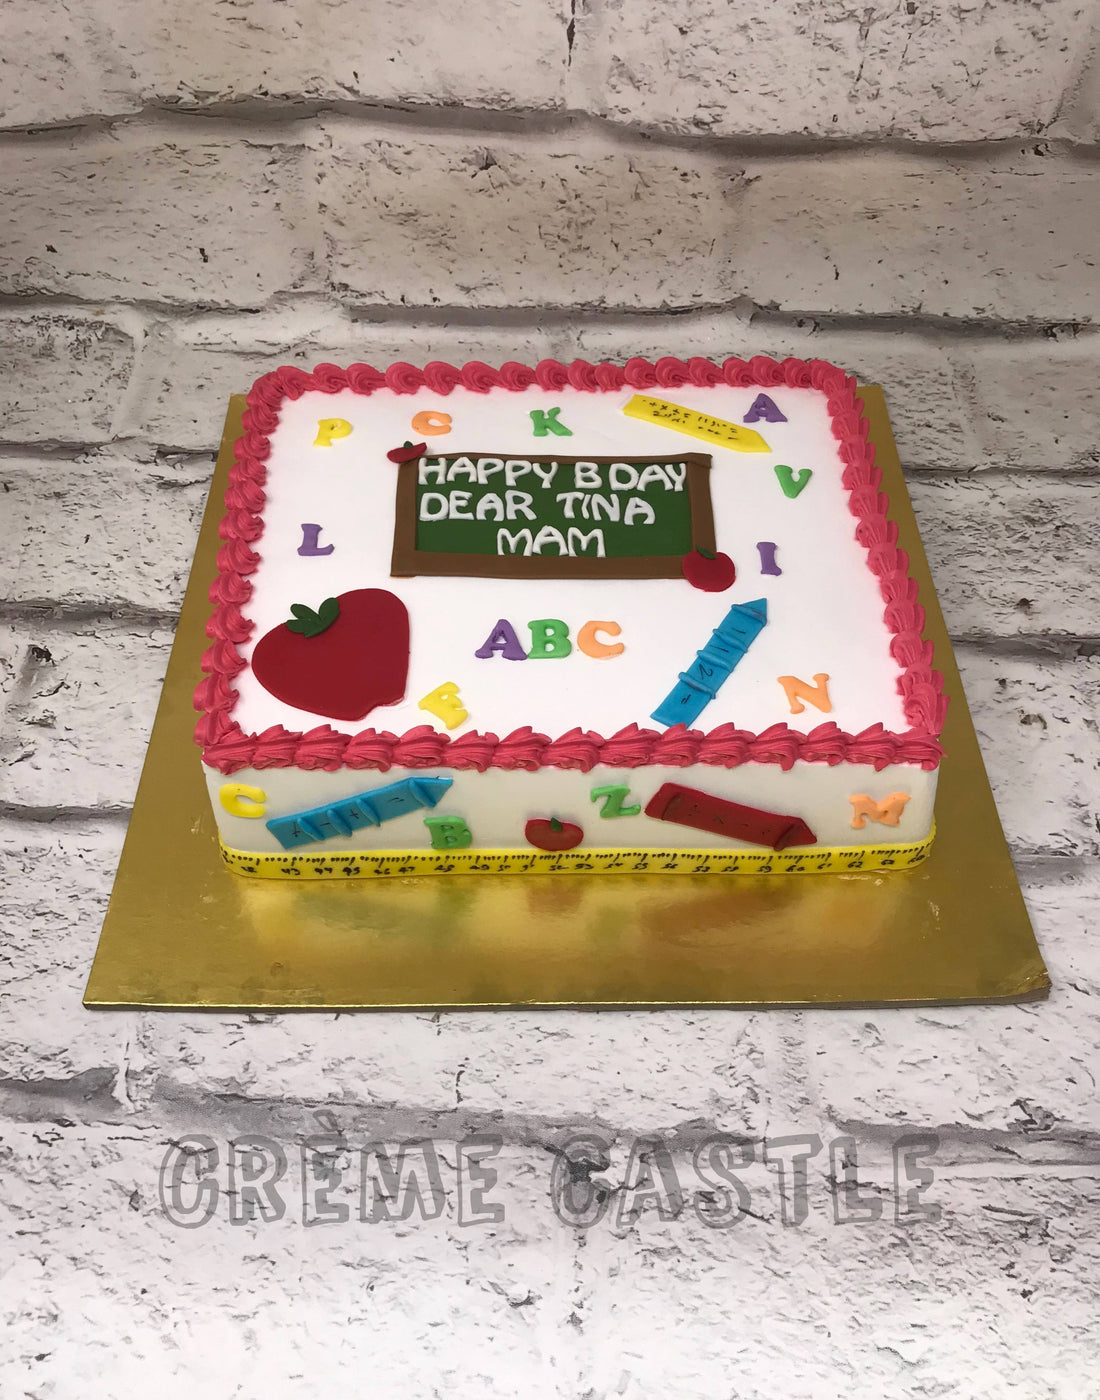 School Theme Cake in Rectangle by Creme Castle